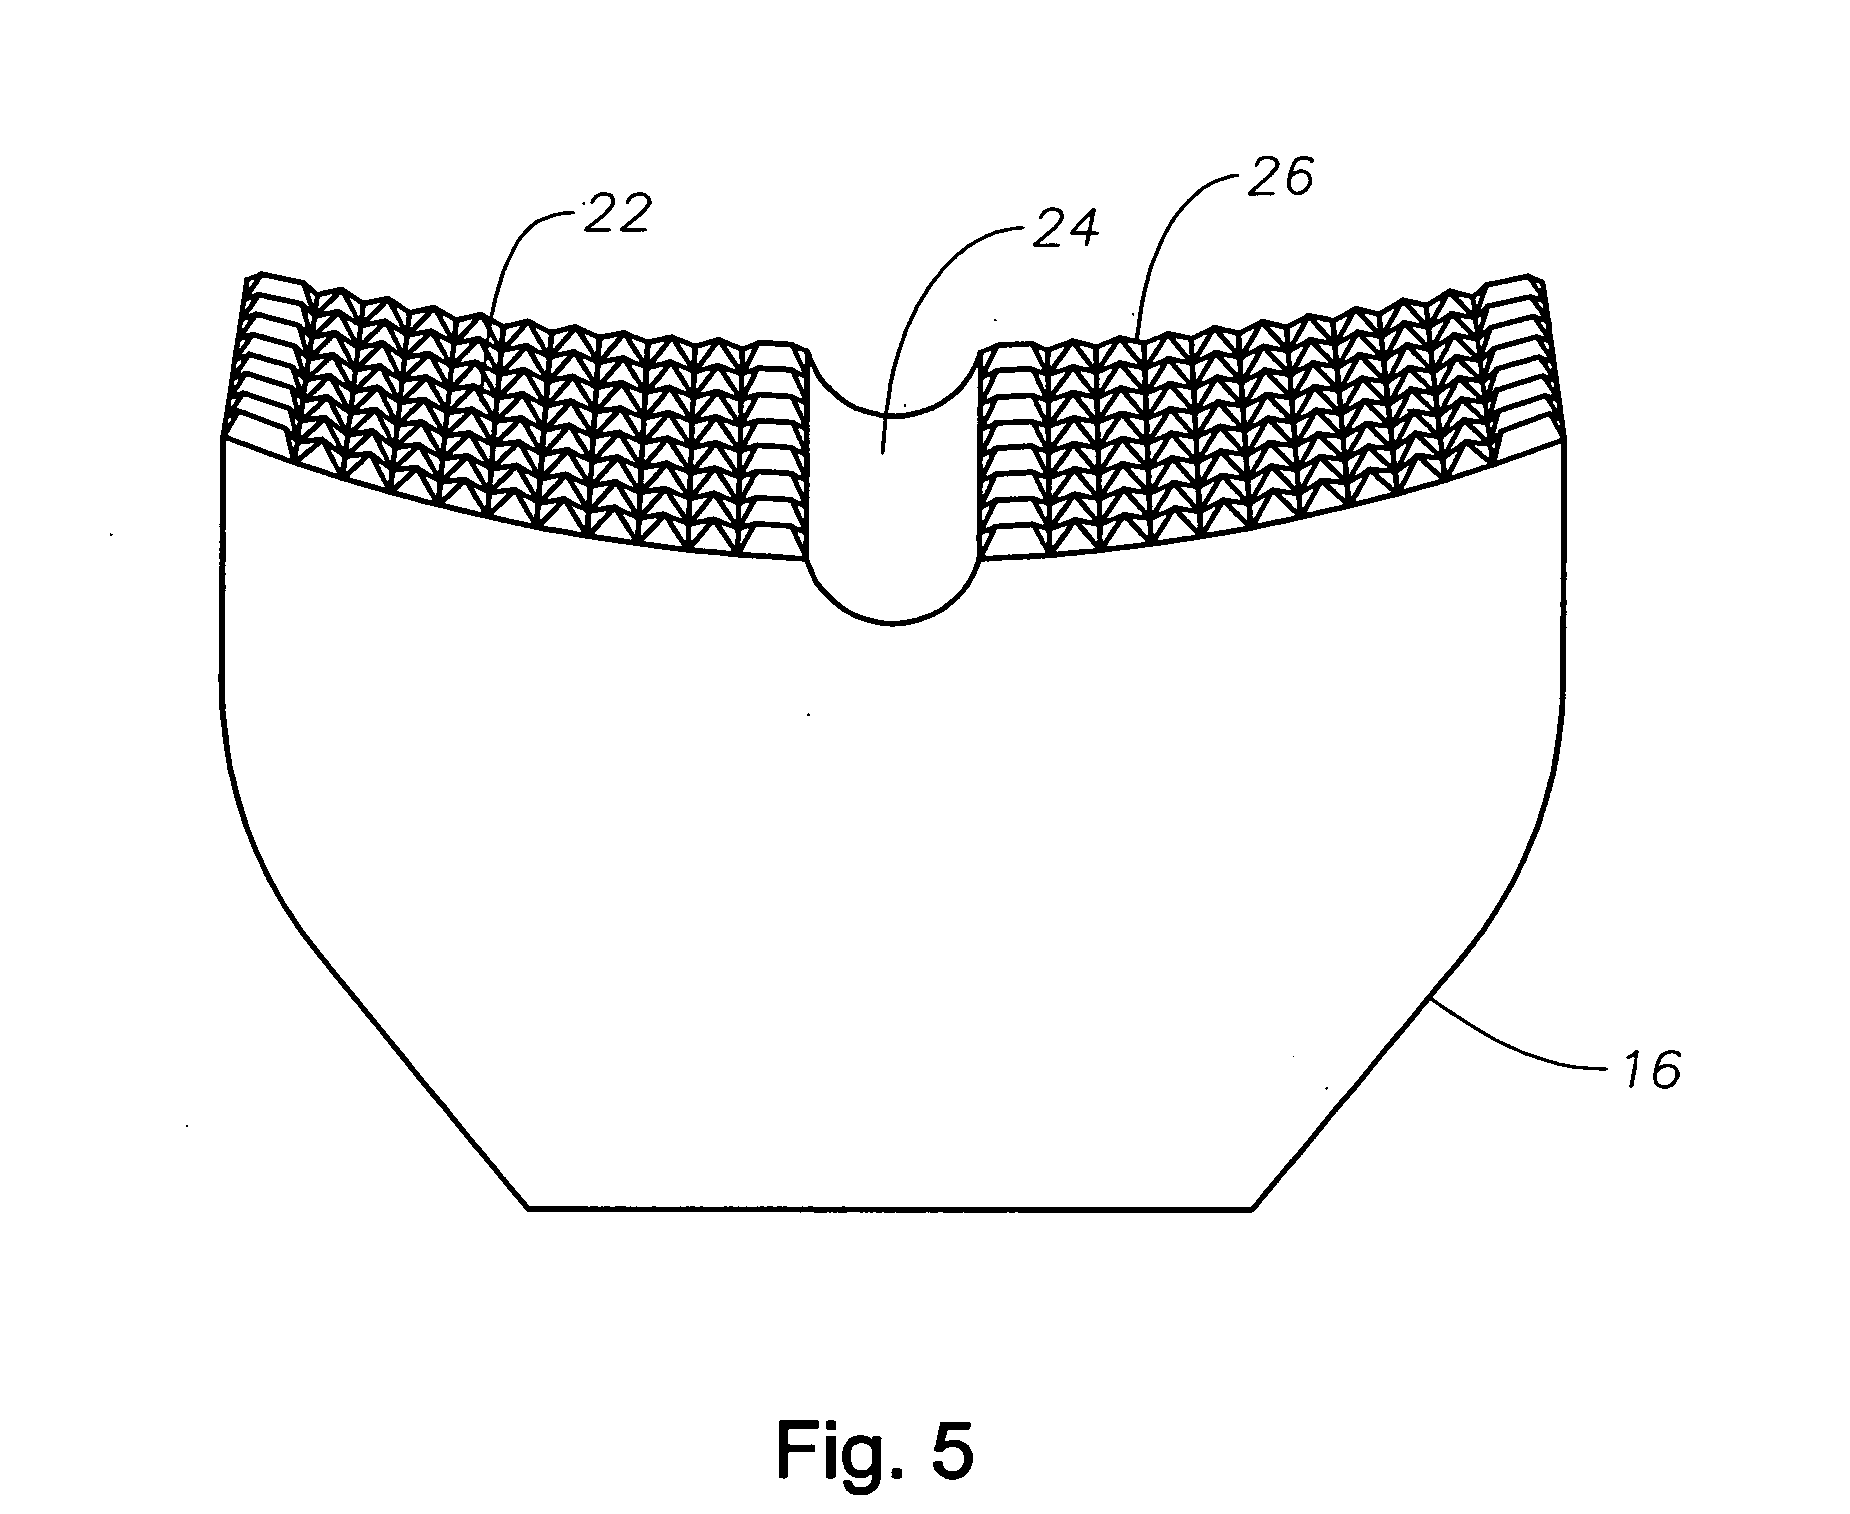 Counter pressure device for ophthalmic drug delivery